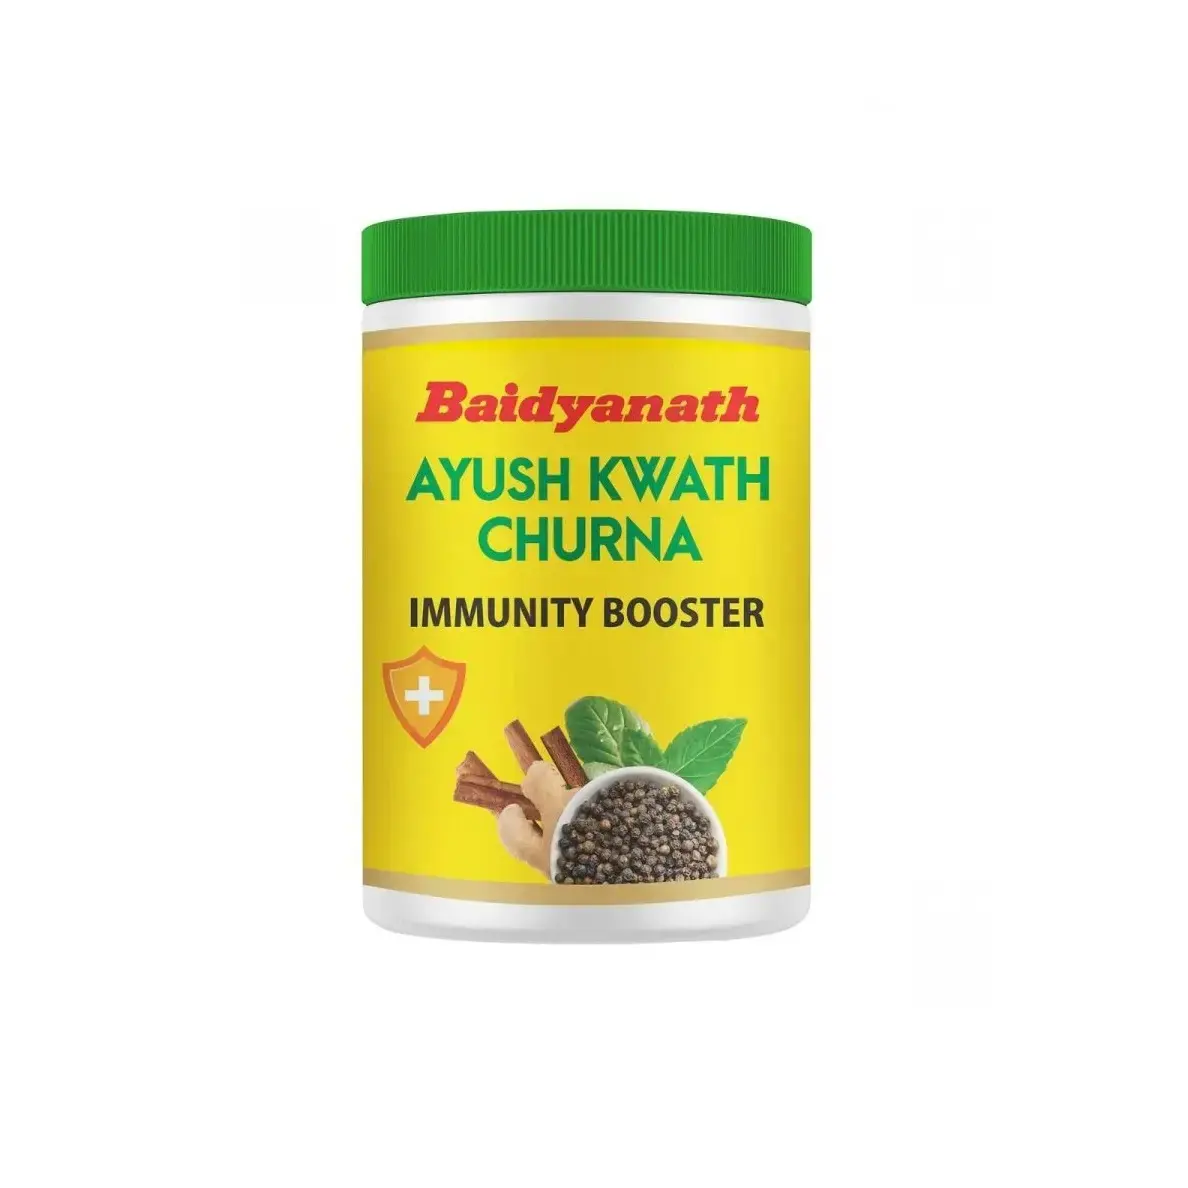 Baidyanath Ayush Kwath Churna for Immunity Booster High On Demand Herbal Supplements from Indian Manufacturer